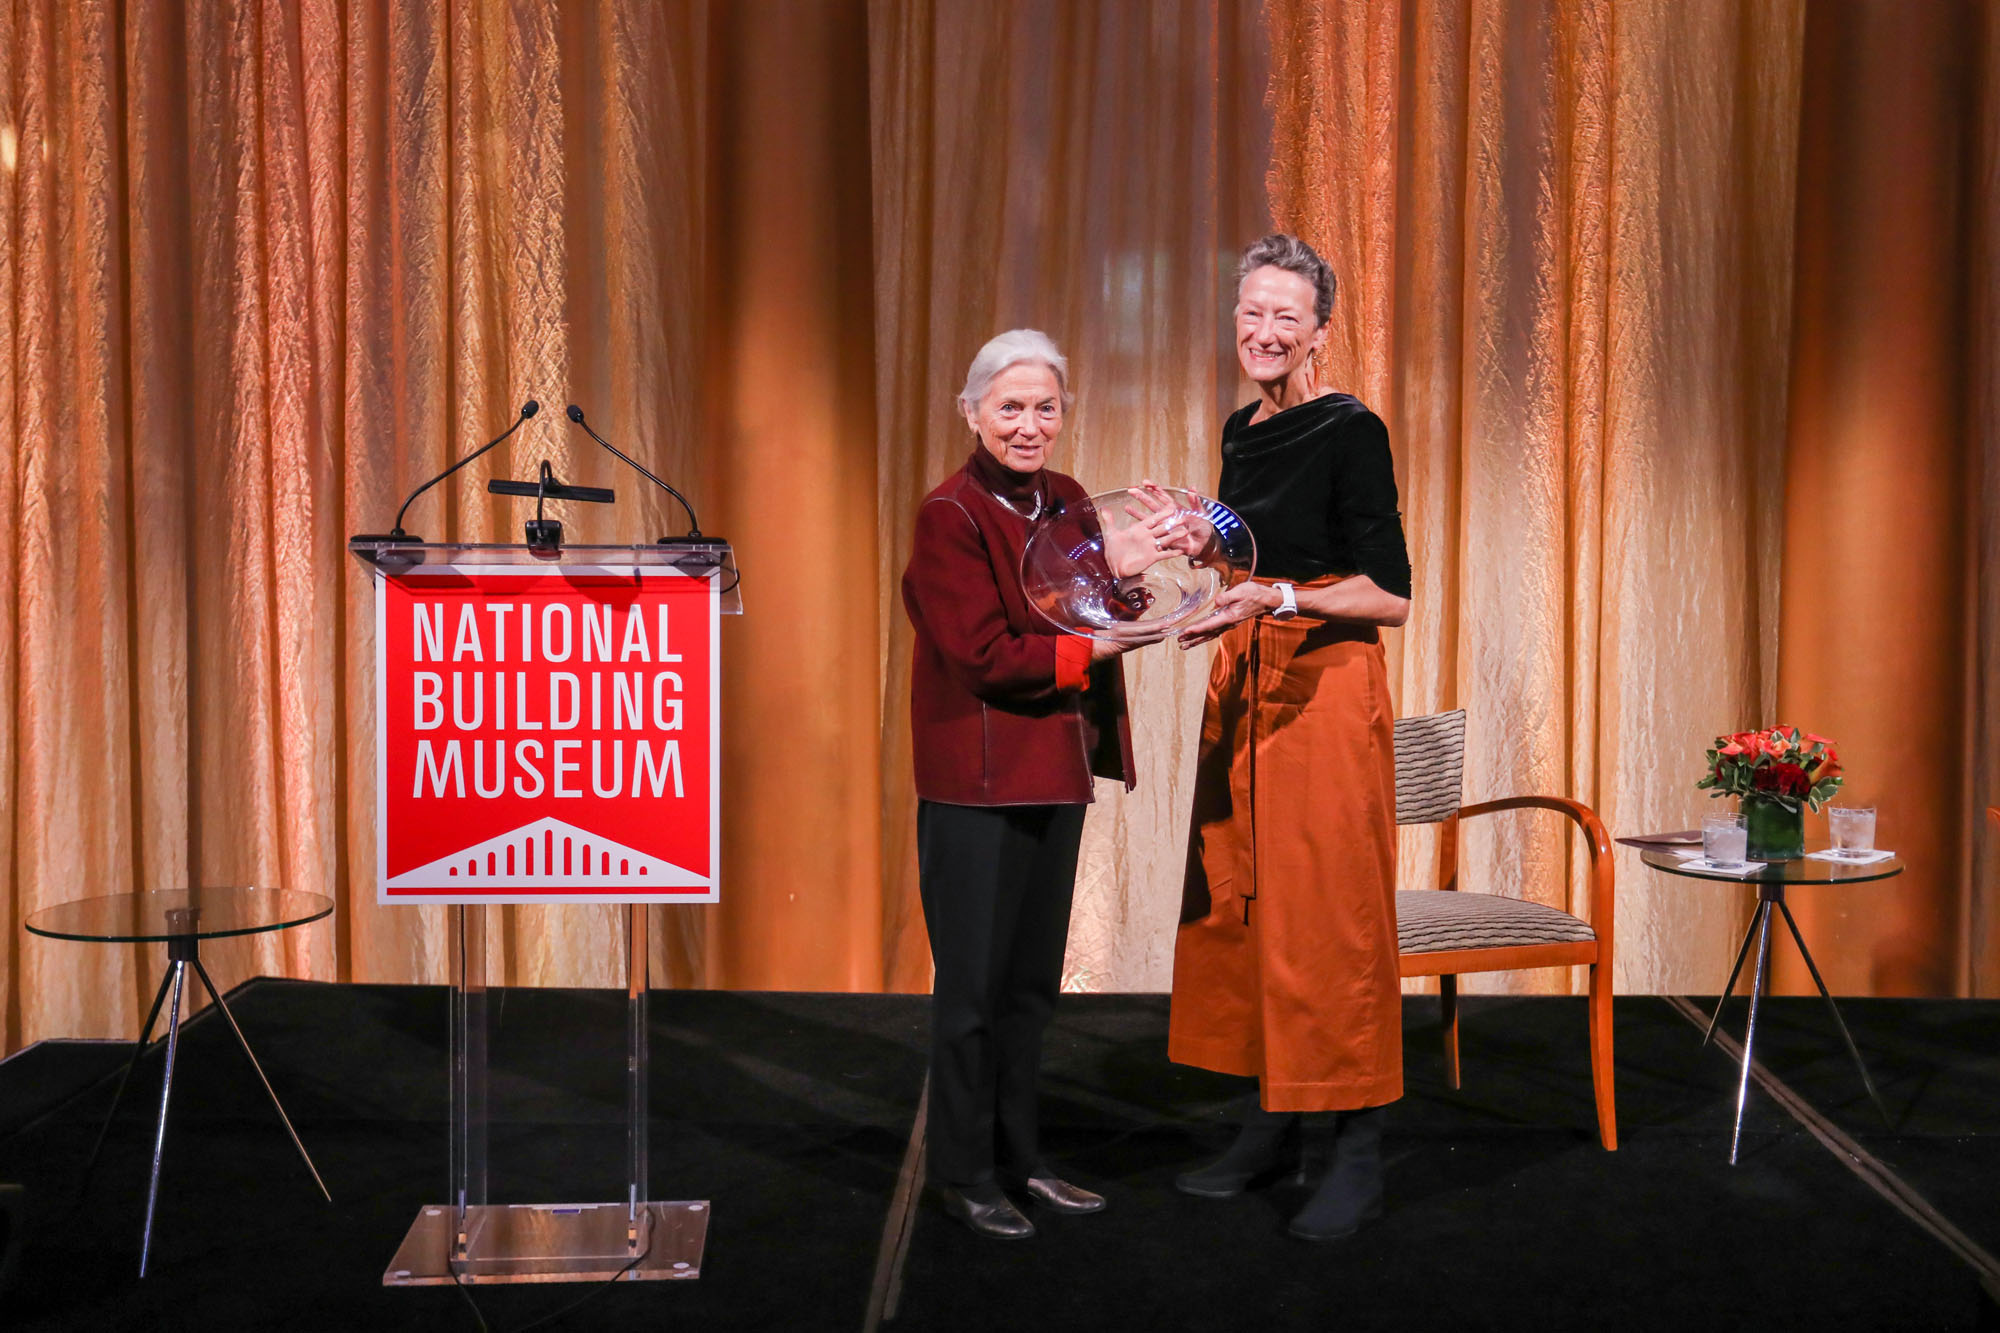 image of two people standing on a stage next to a podium that says "National building musuem"